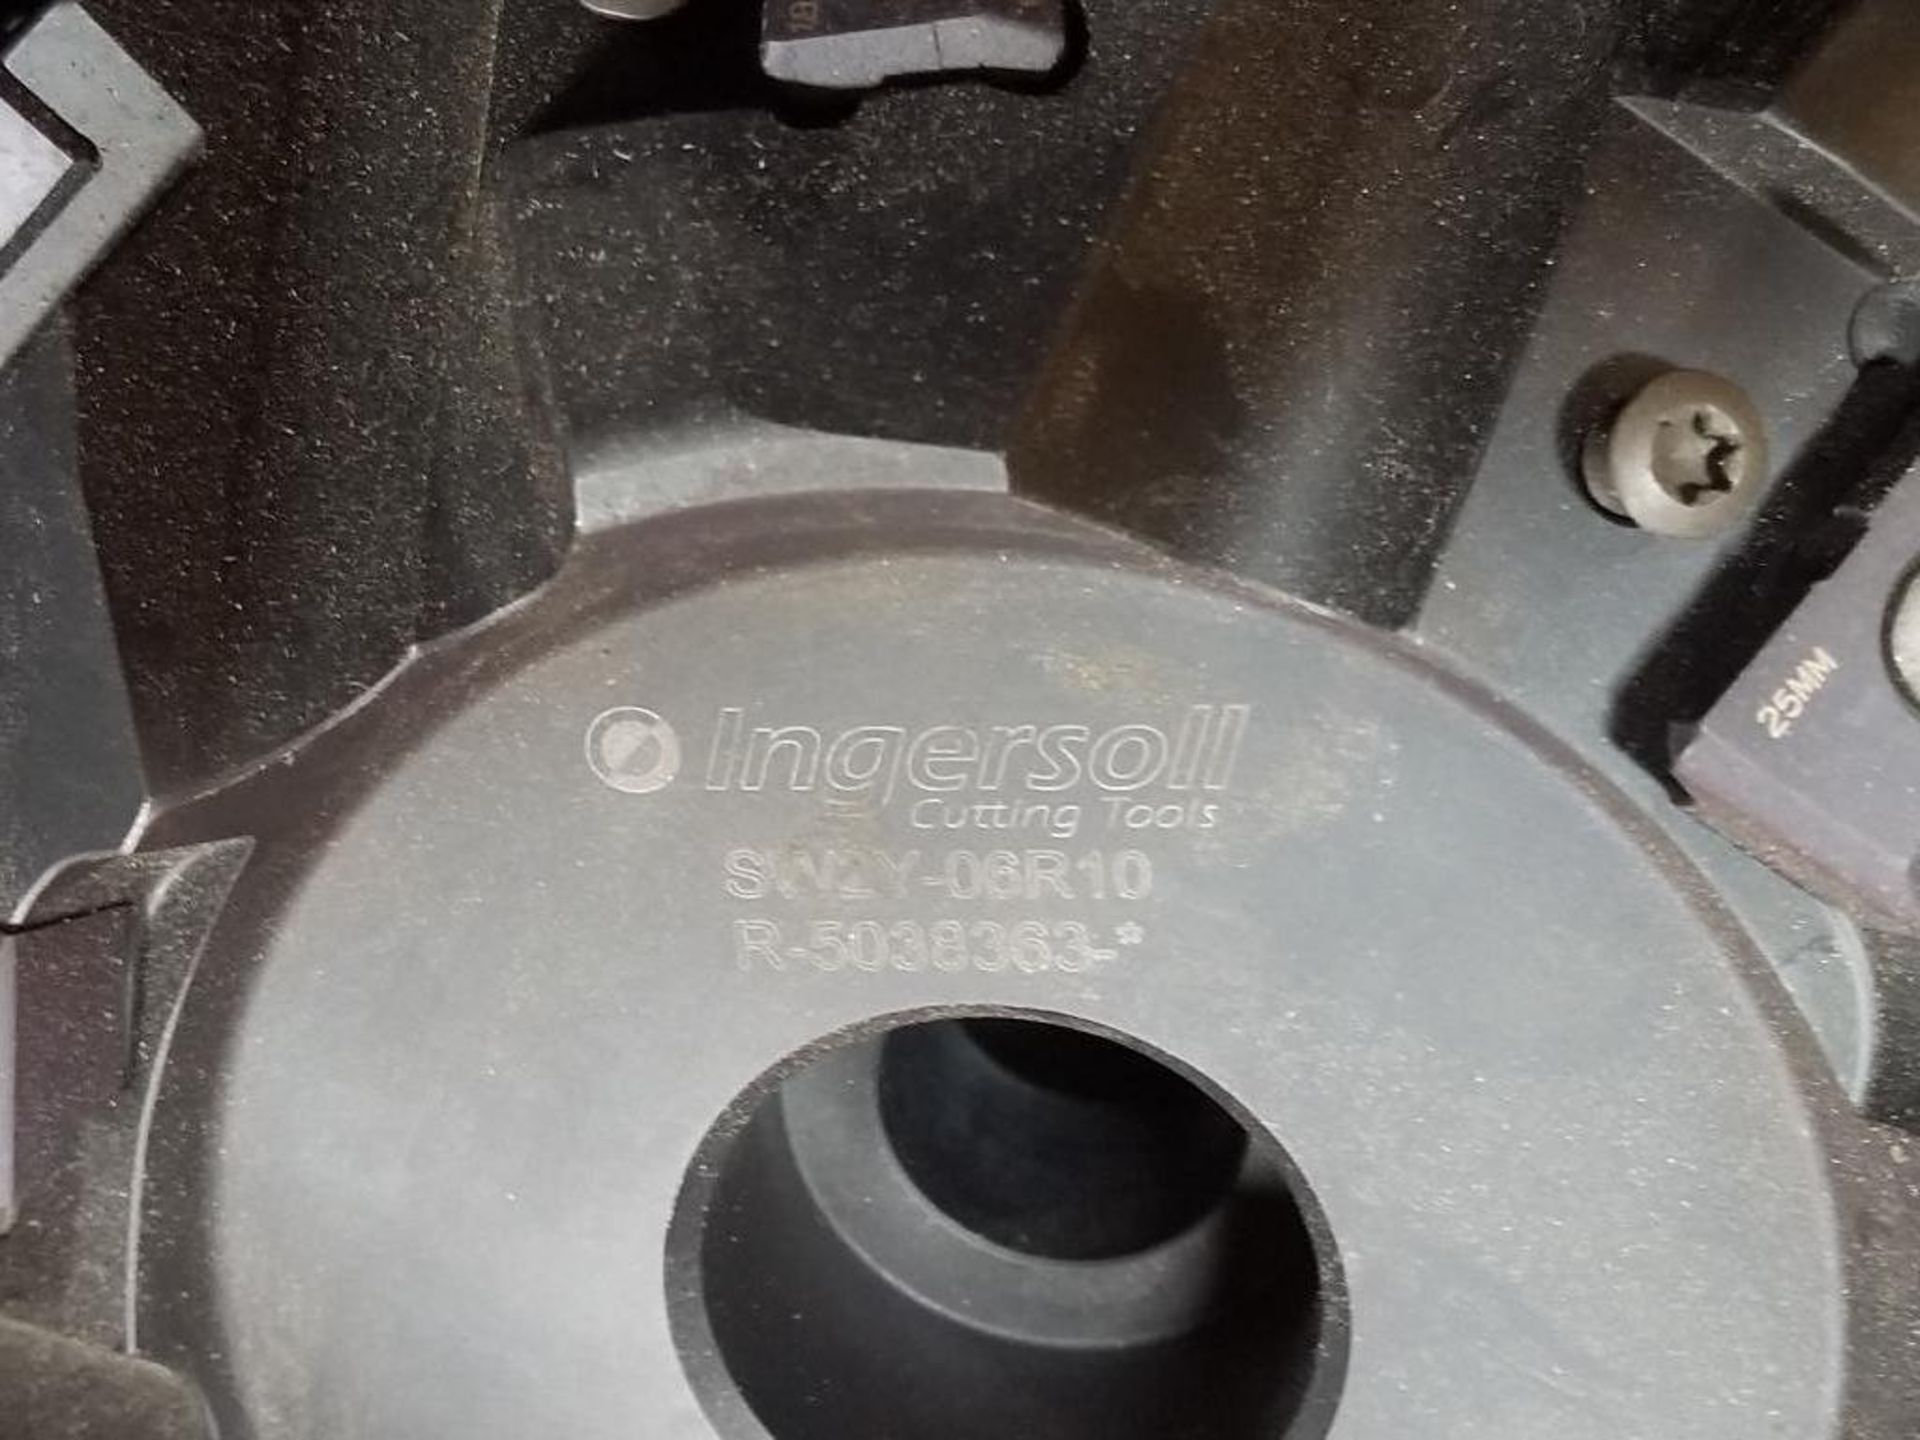 Ingersoll Rand cutting tools SW2Y-06R10 face mill. New in box. - Image 3 of 3